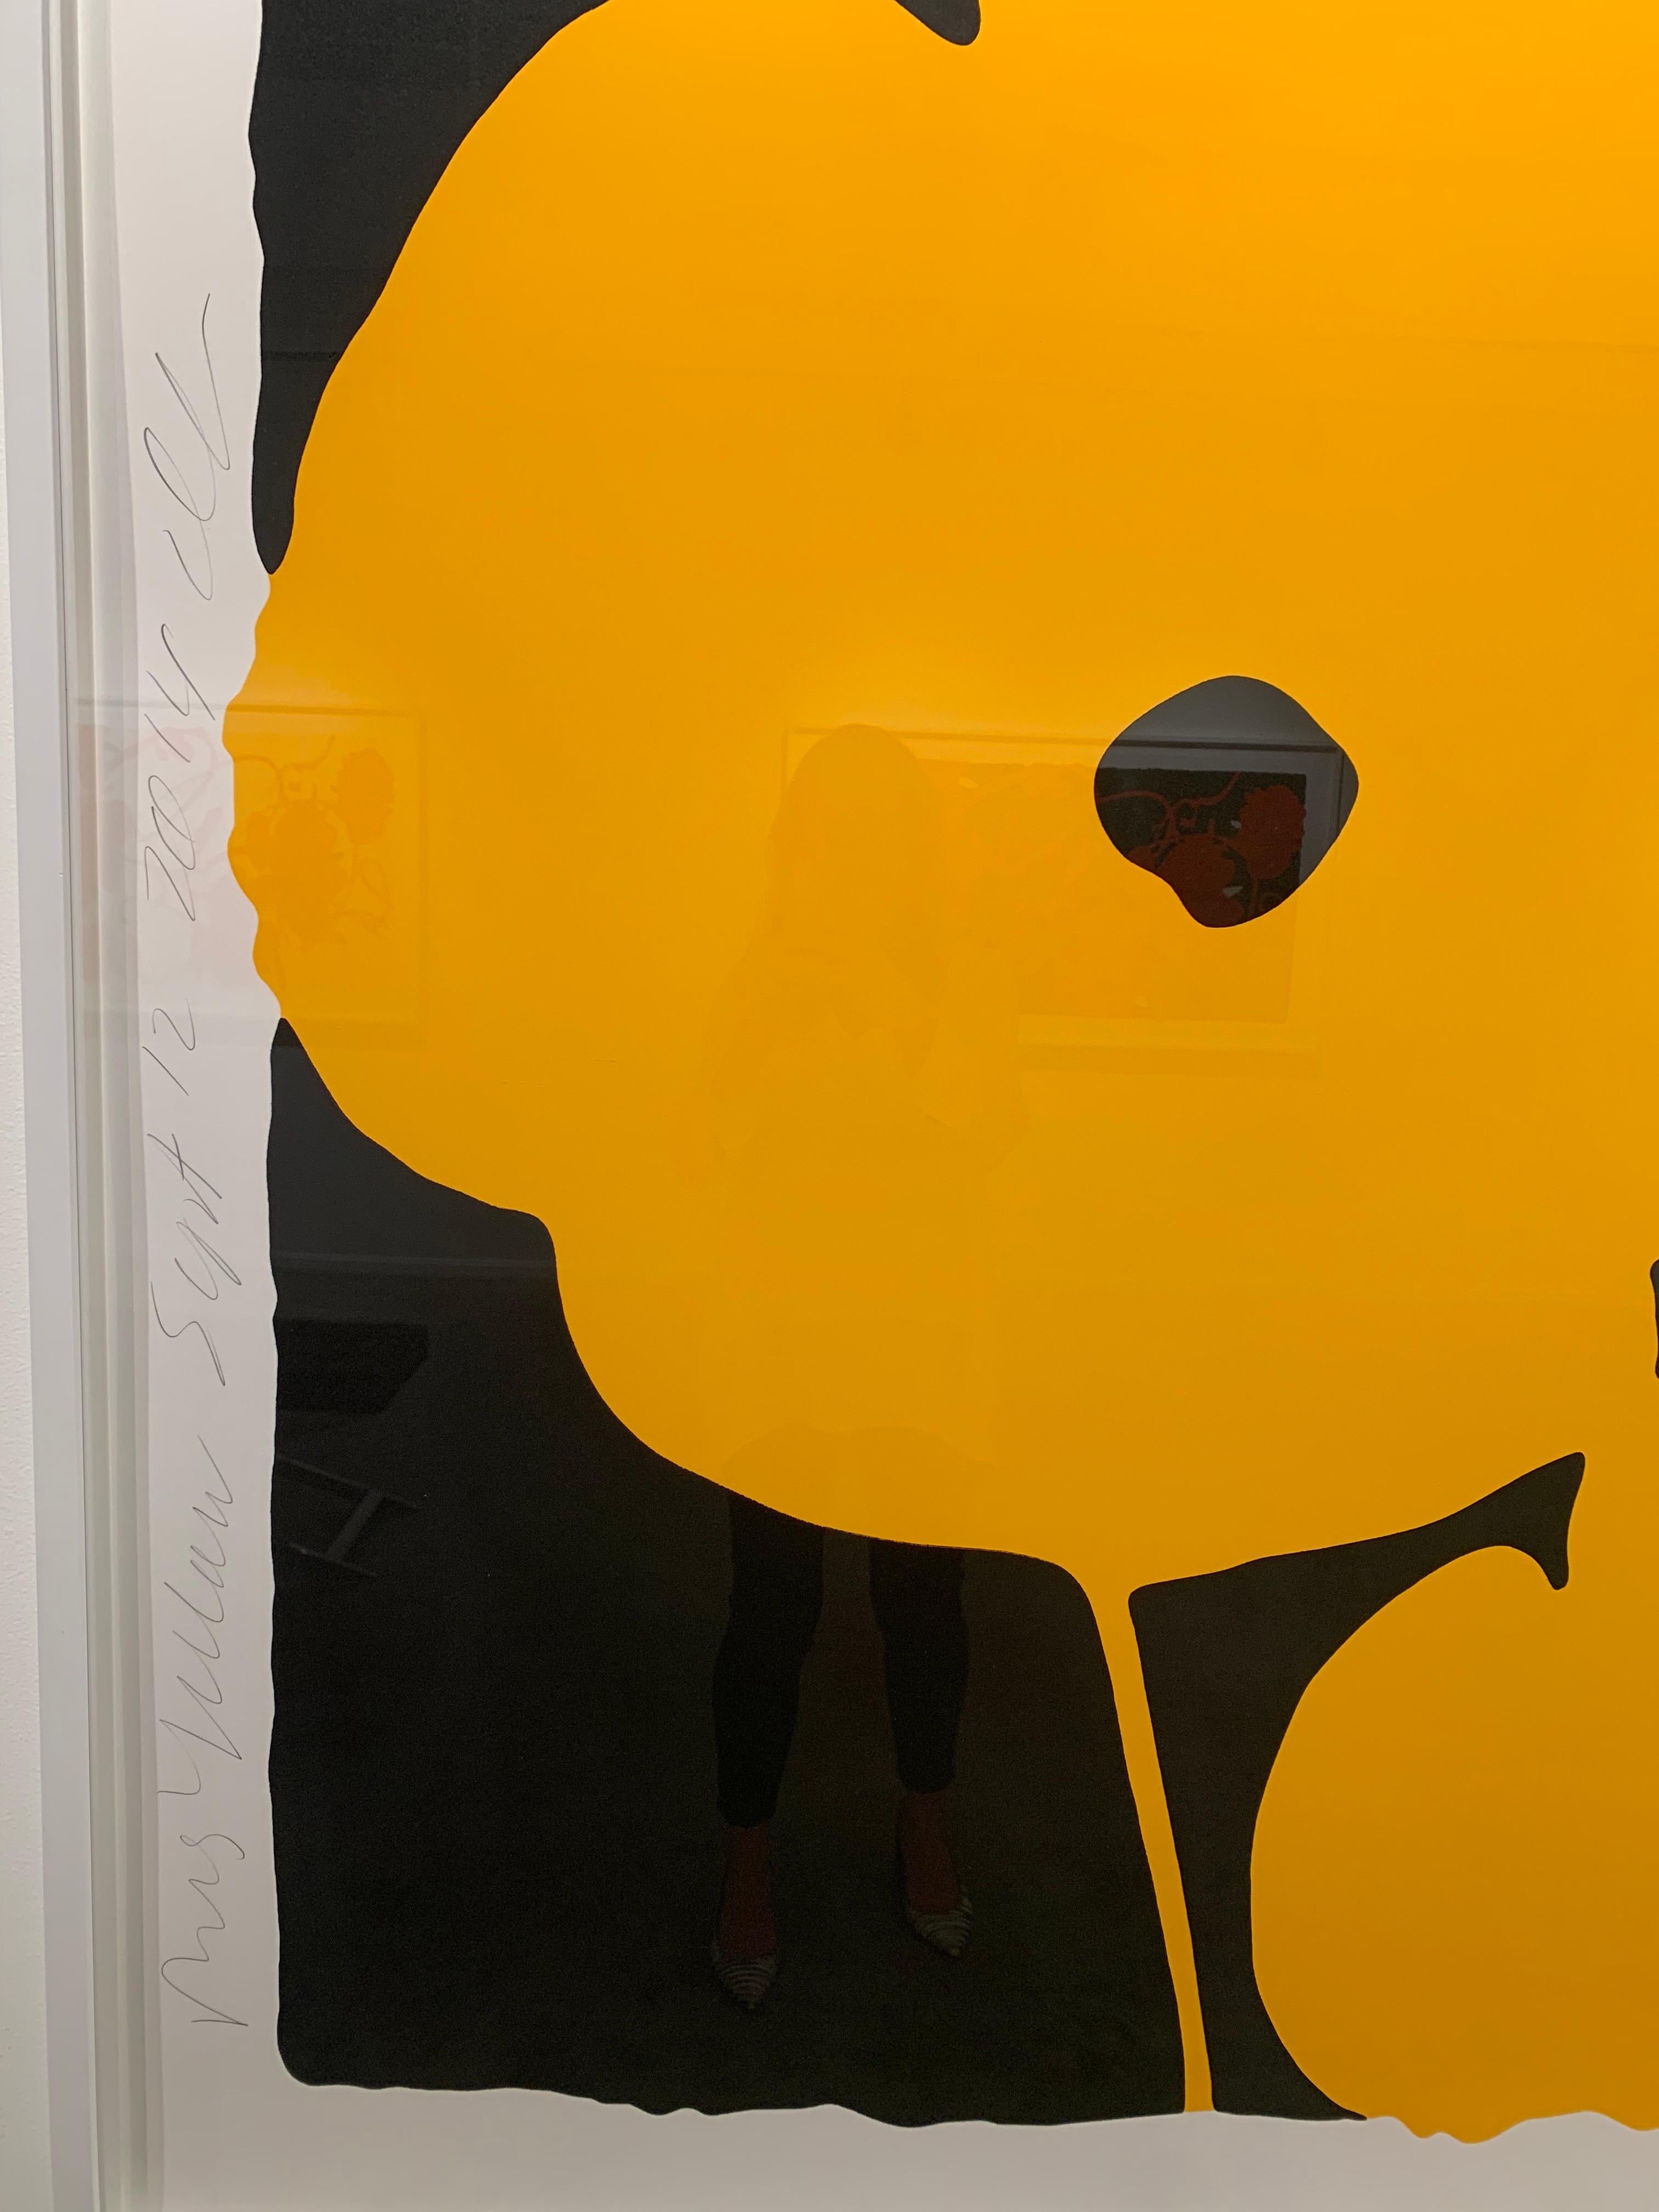 Donald Sultan (Born 1951)
Big Yellow, September 14, 2014, 2014
Color silkscreen with enamel inks and tar-like texture
60 x 60 in.
AP 12/15 aside from the edition of 30
Signed, titled and dated in pencil by the artist
